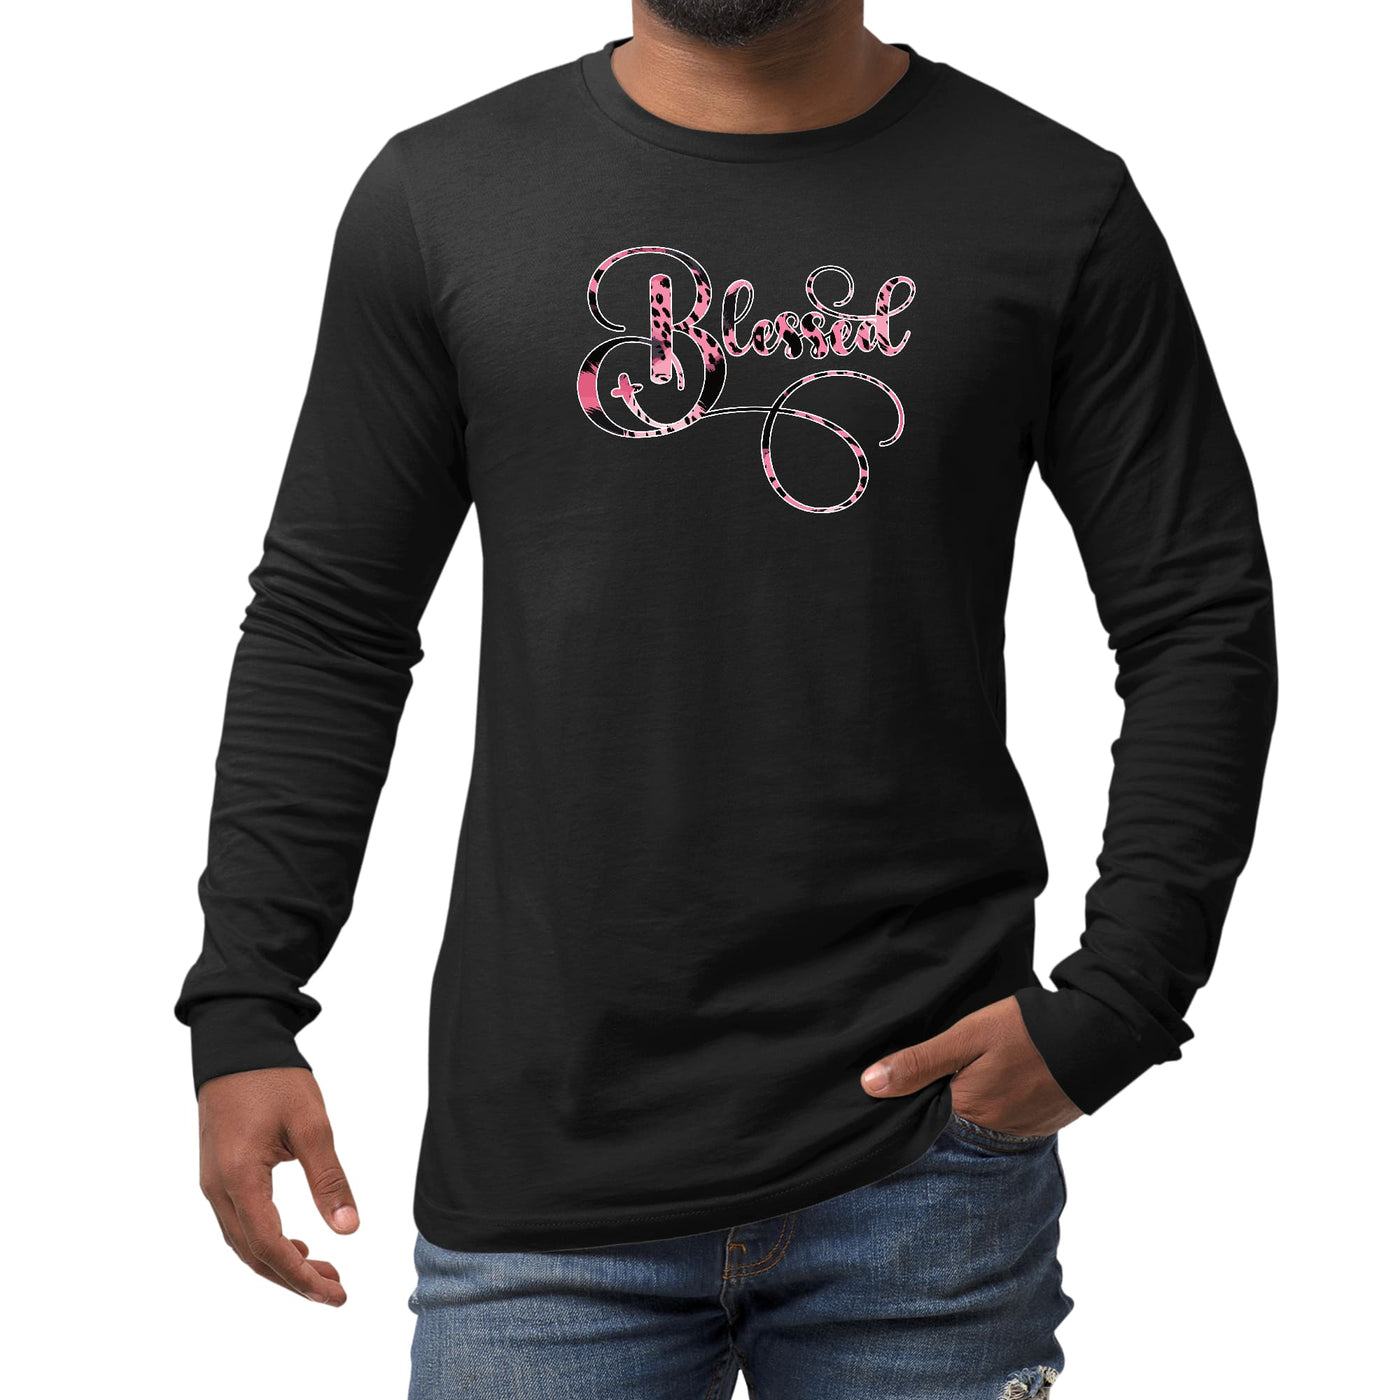 Long Sleeve Graphic T-shirt - Blessed Pink And Black Patterned - Unisex